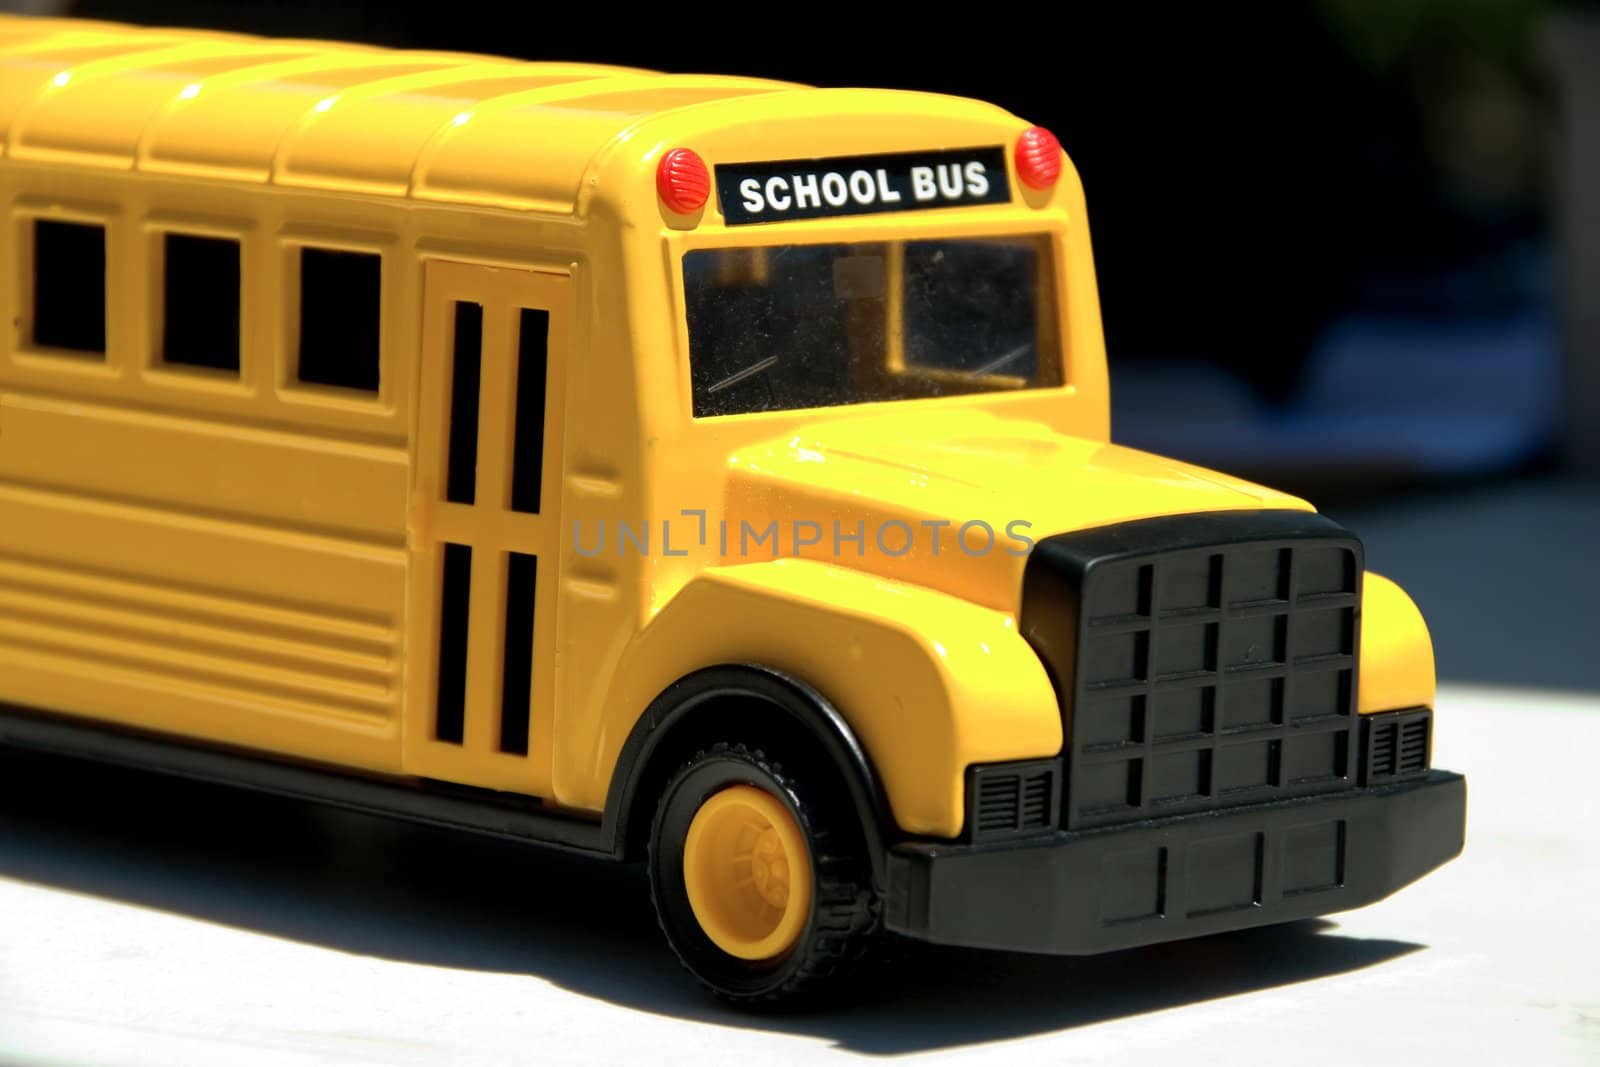 This is a picture of a toy school bus shoing the front end and entrance door.